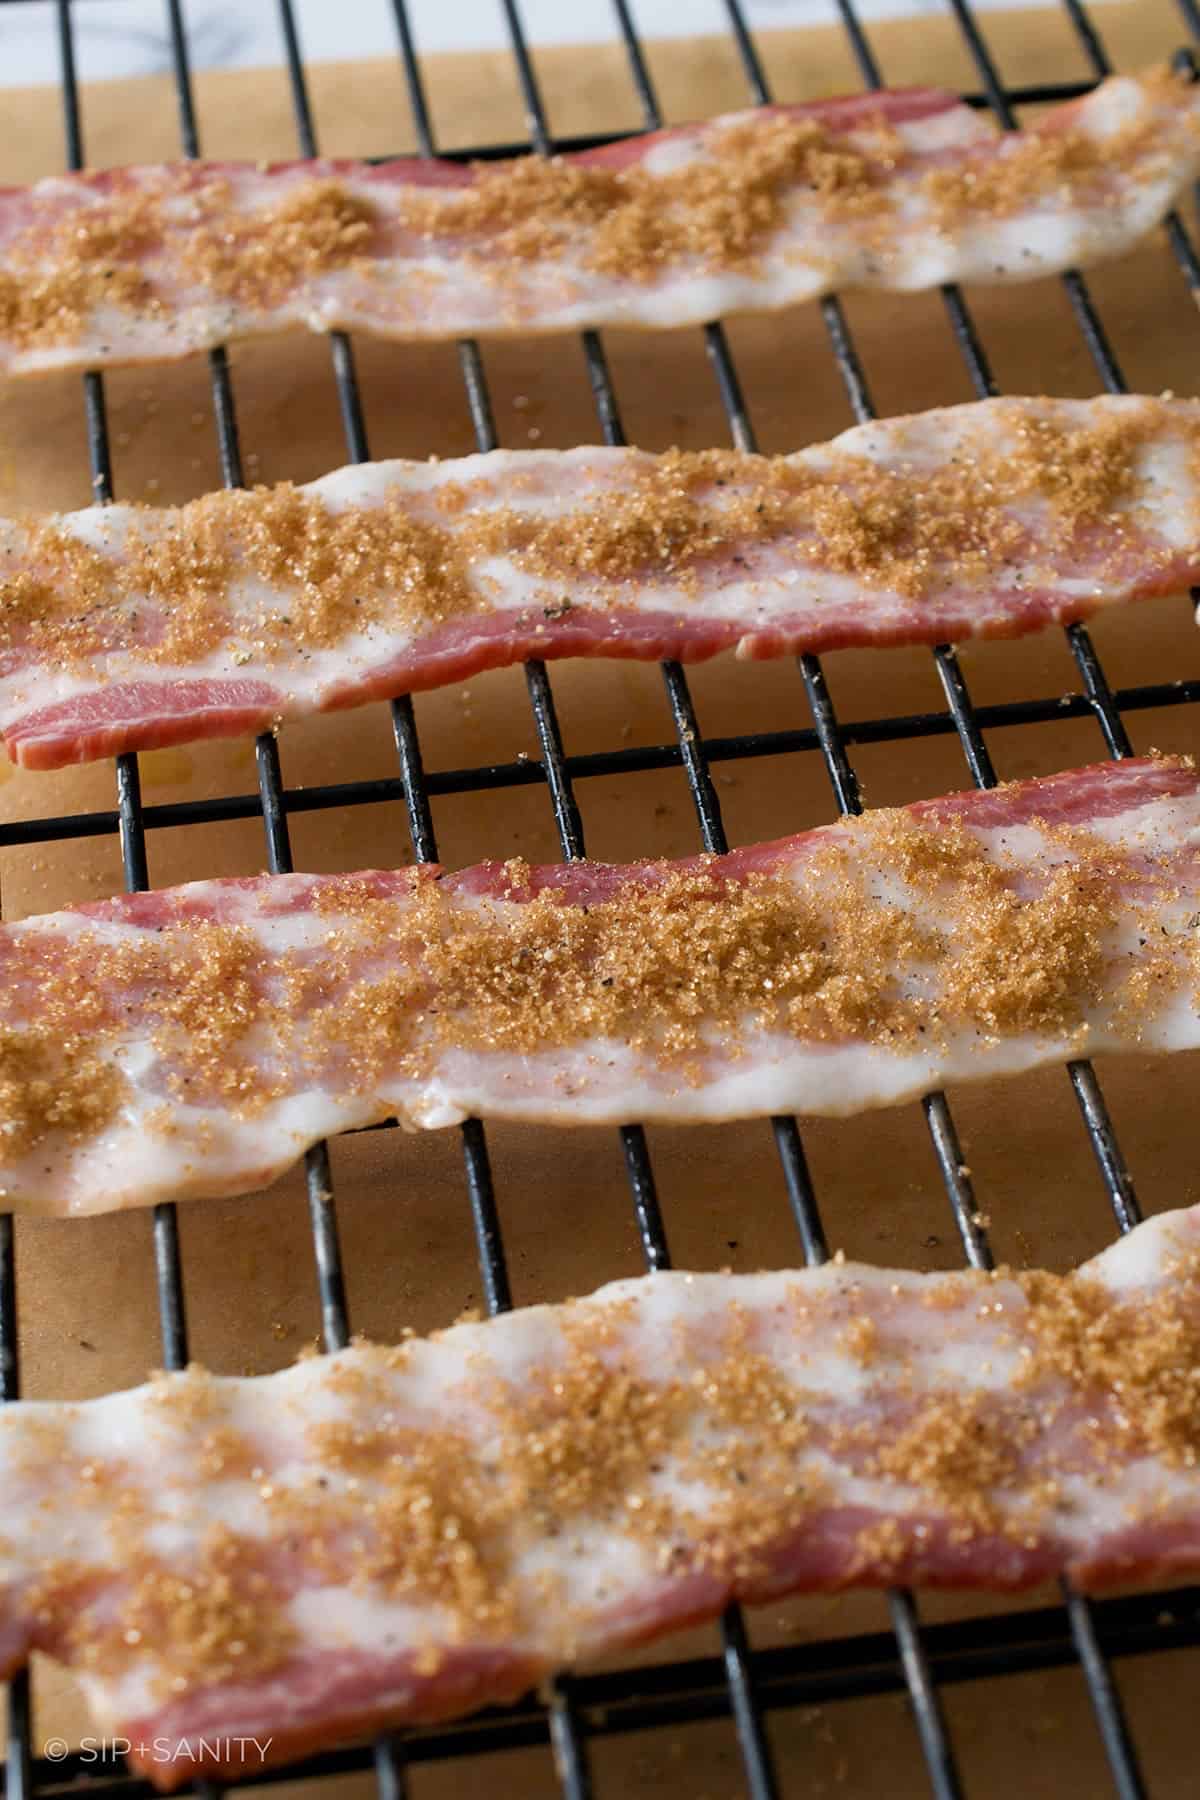 Slices of brown sugared bacon on a wire rack.